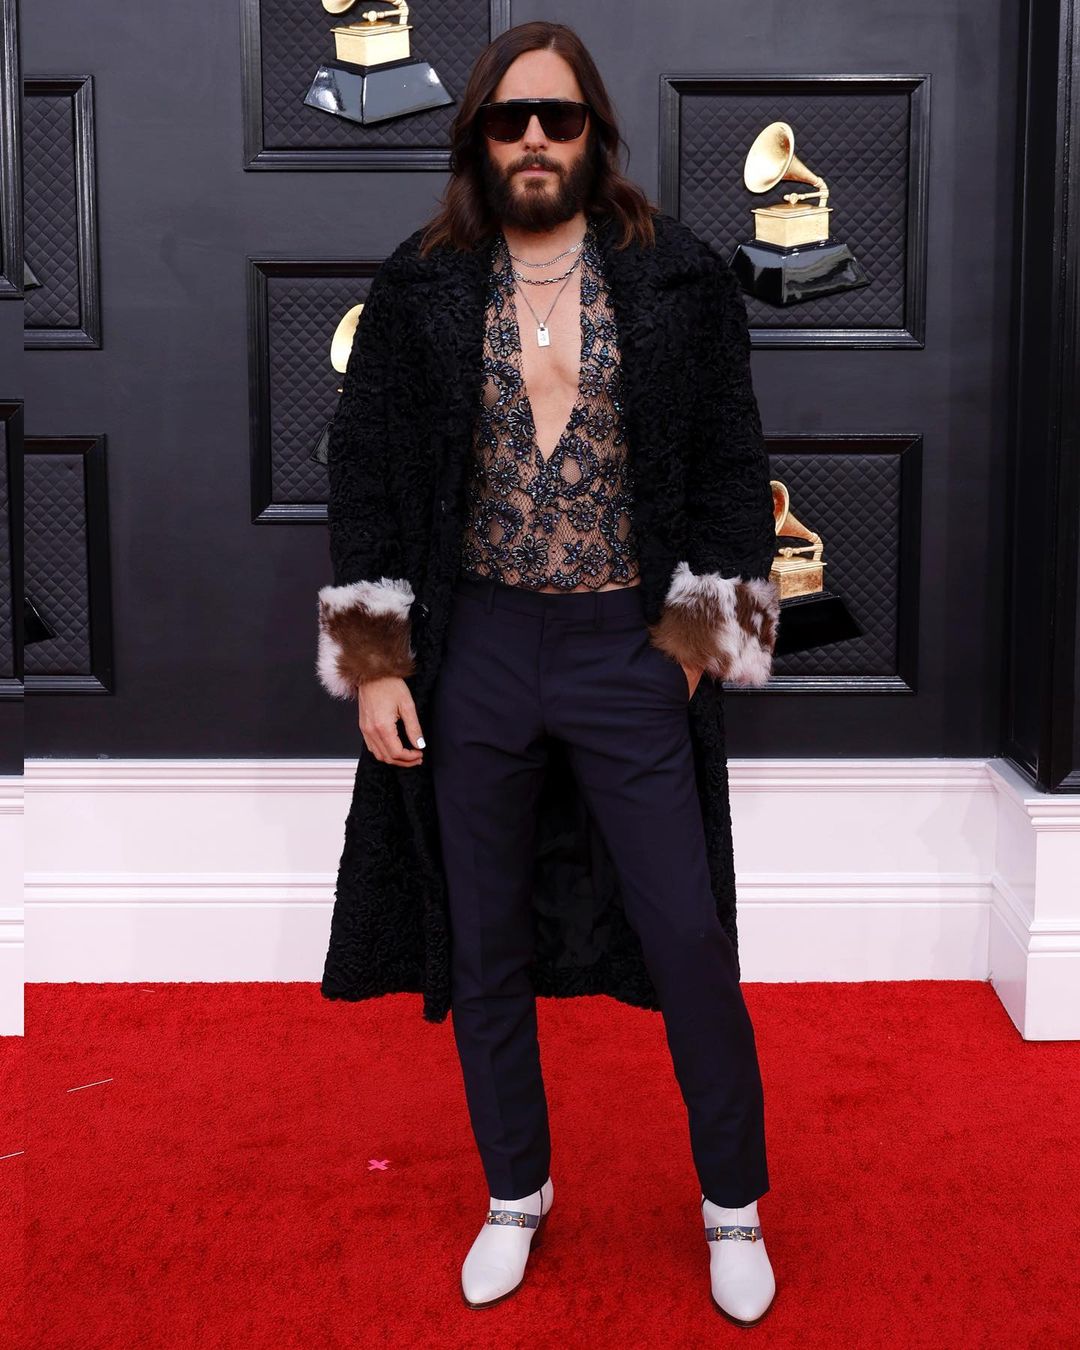 Jared Leto rocked a head-to-toe Gucci look